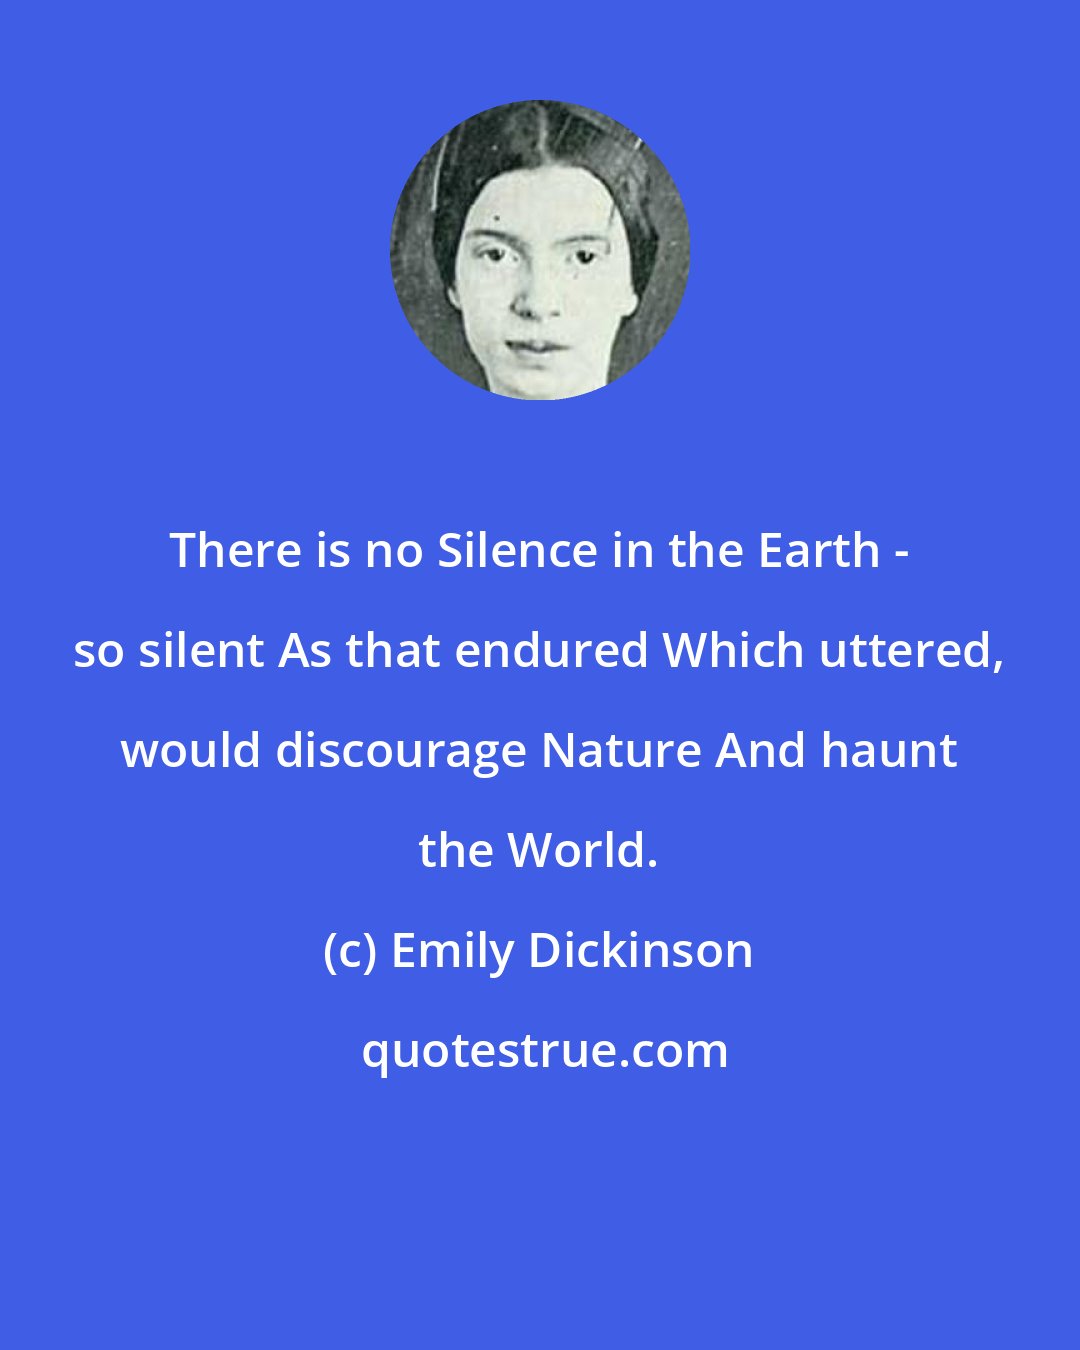 Emily Dickinson: There is no Silence in the Earth - so silent As that endured Which uttered, would discourage Nature And haunt the World.